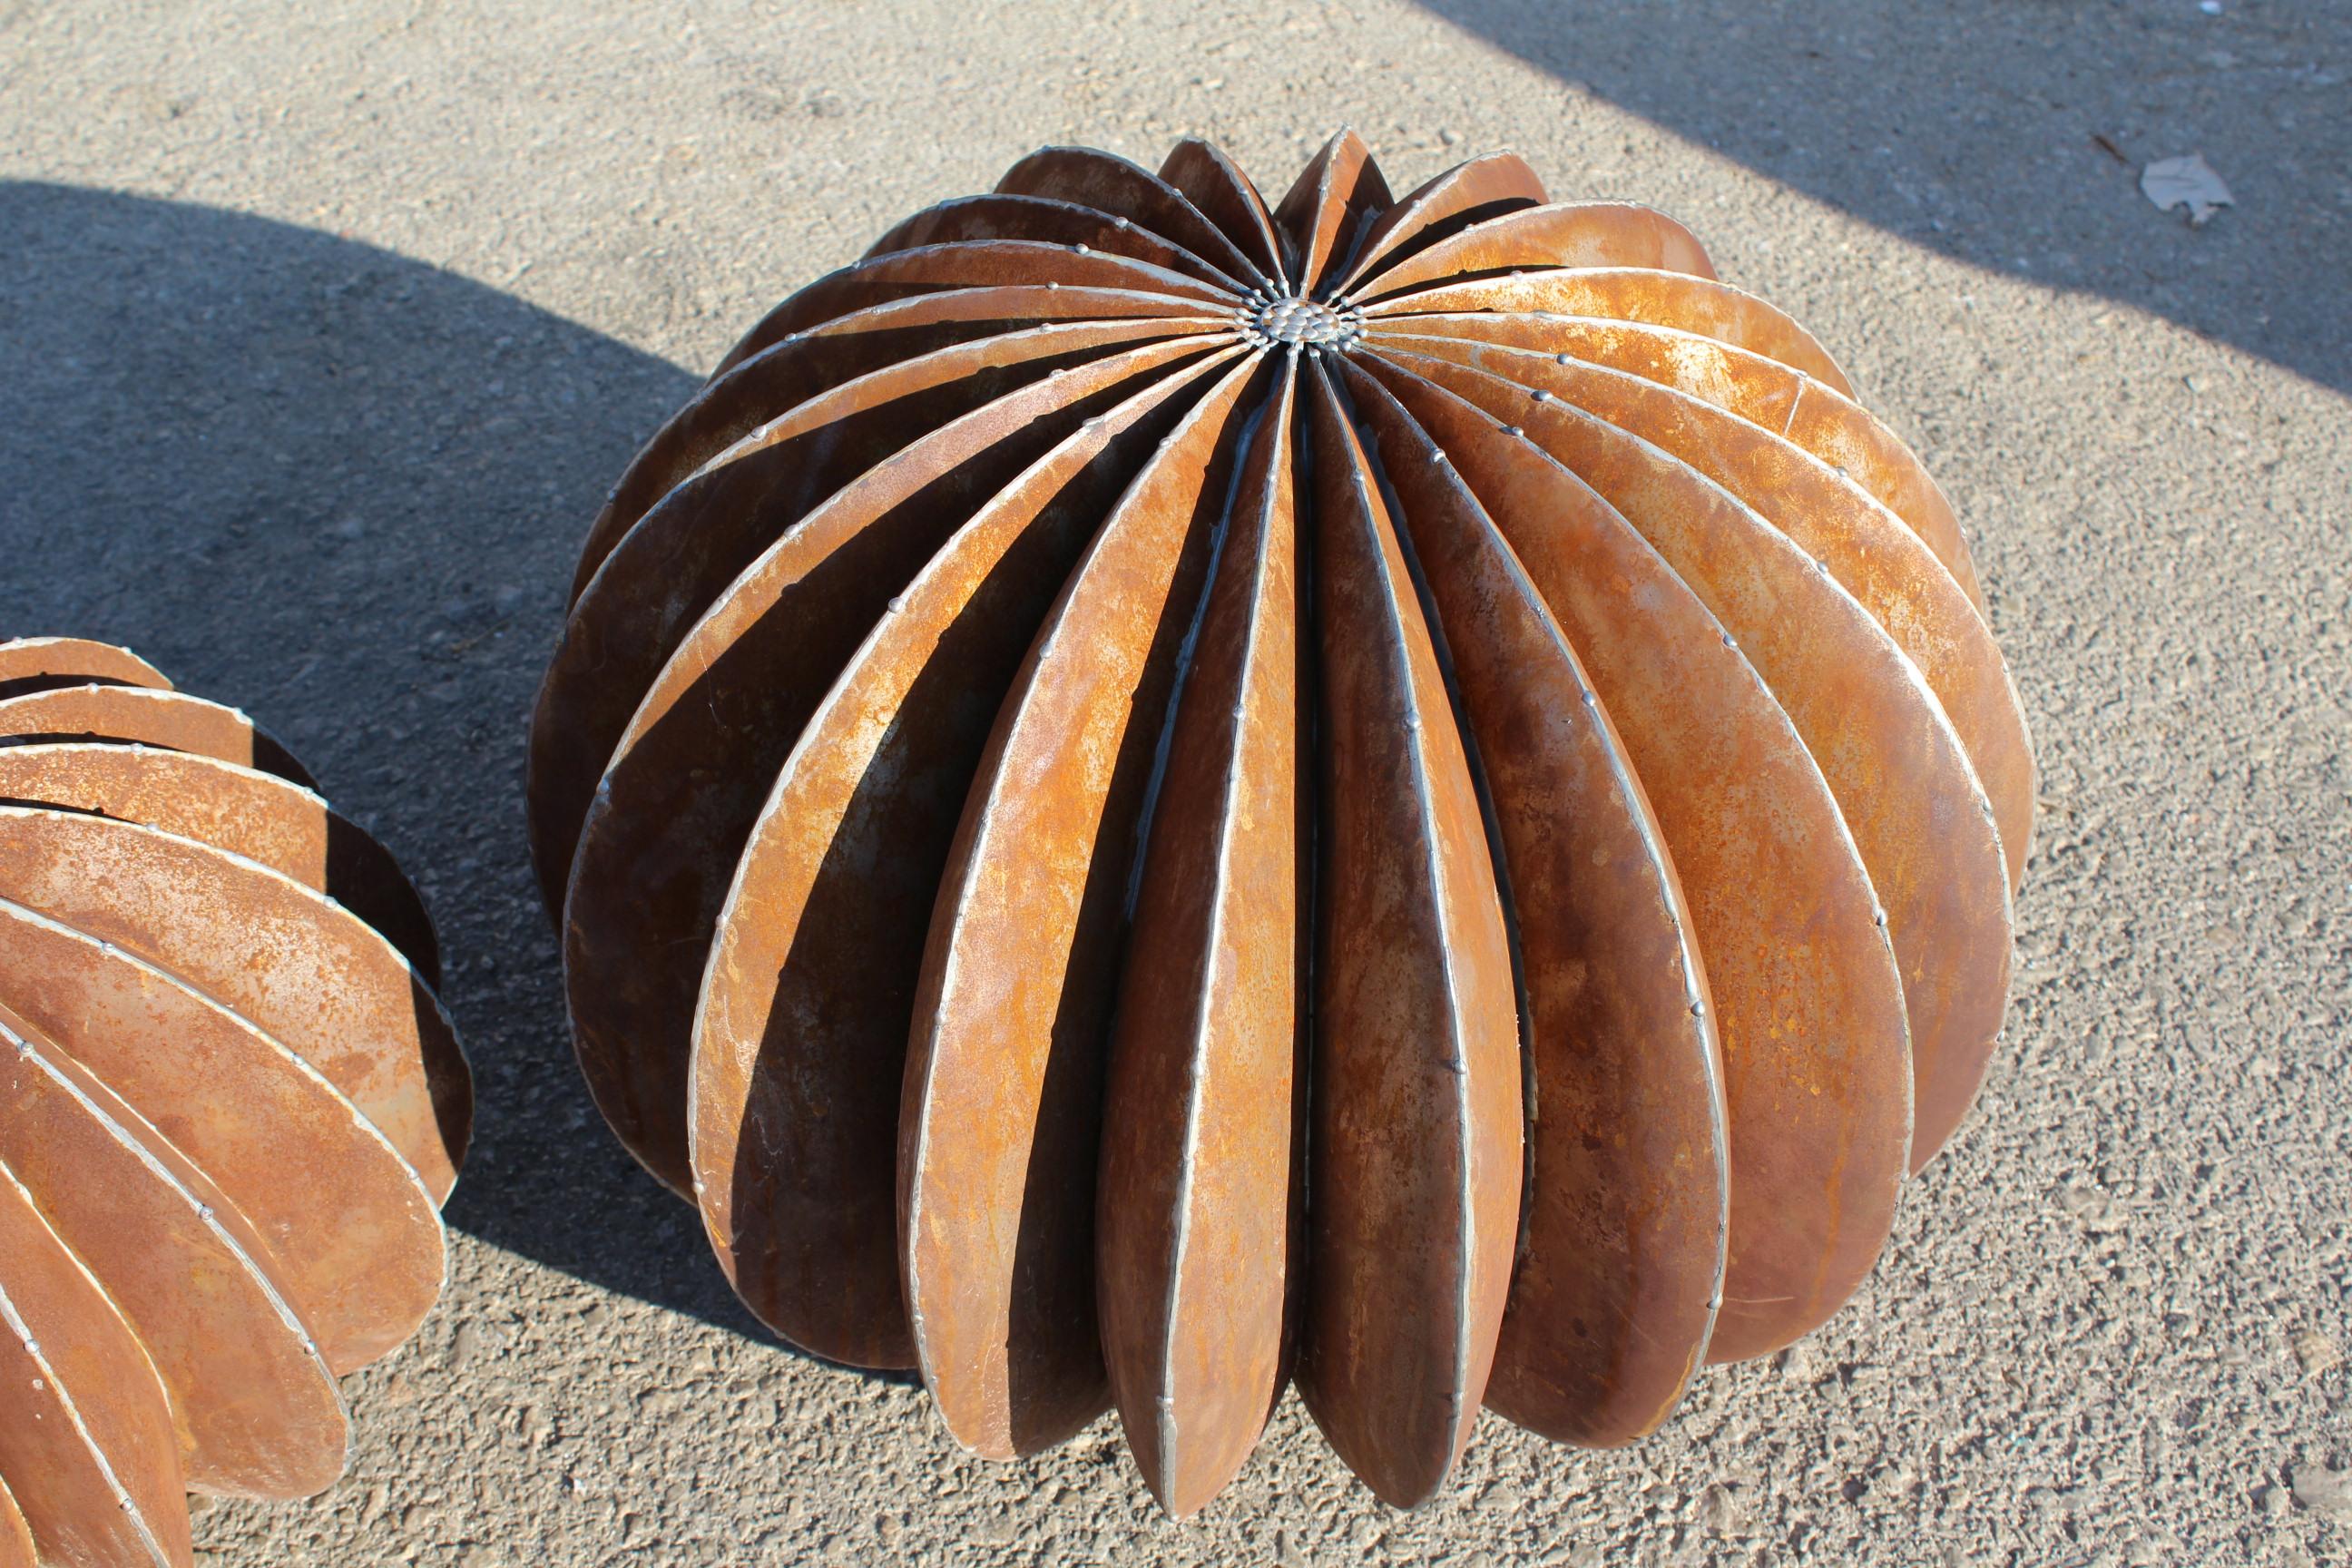 Contemporary Set of Iron Ball Cactus Sculptures in Different Sizes